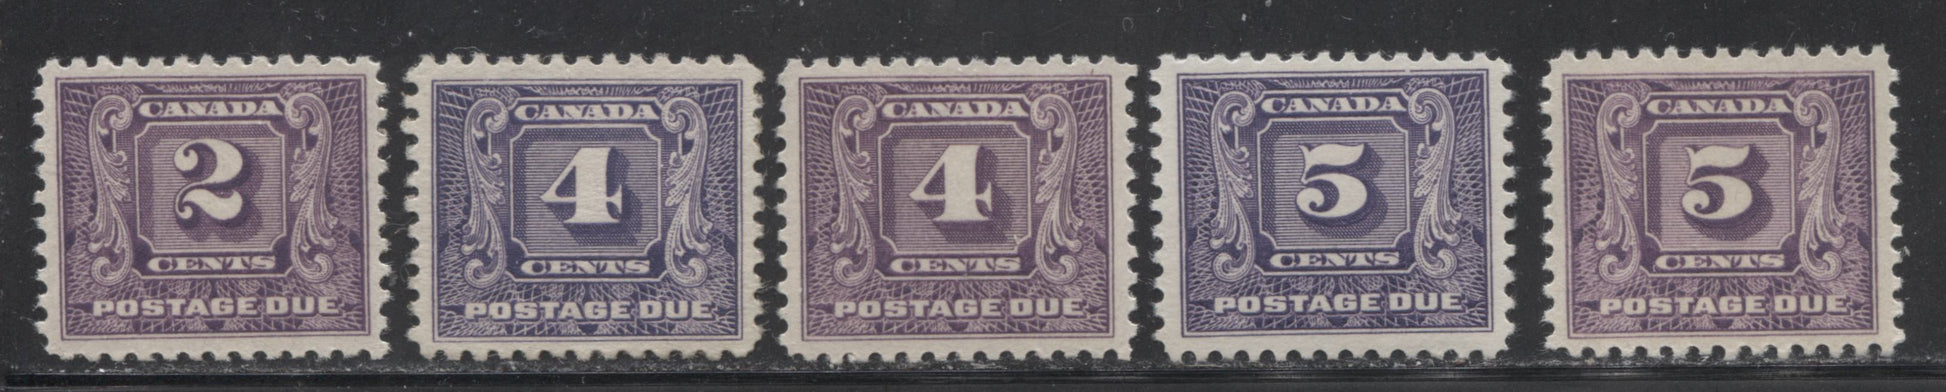 Canada #J7-J9i 1930-1935 Second Postage Due Issue - Specialized Group of 5 VF Mint Stamps Brixton Chrome 